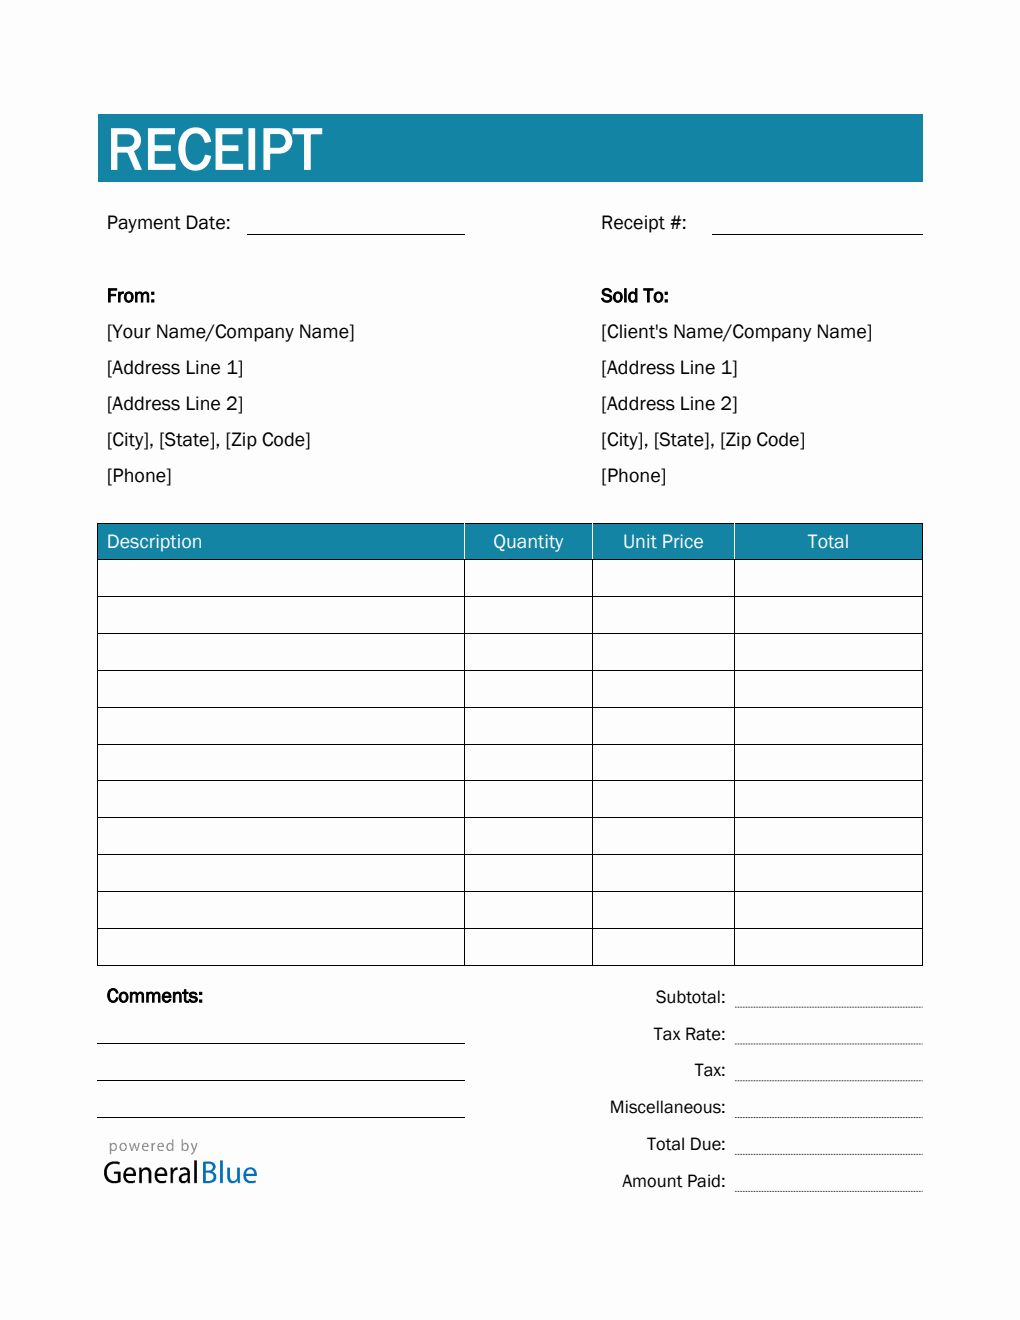 Receipt Template in Word (Colorful)